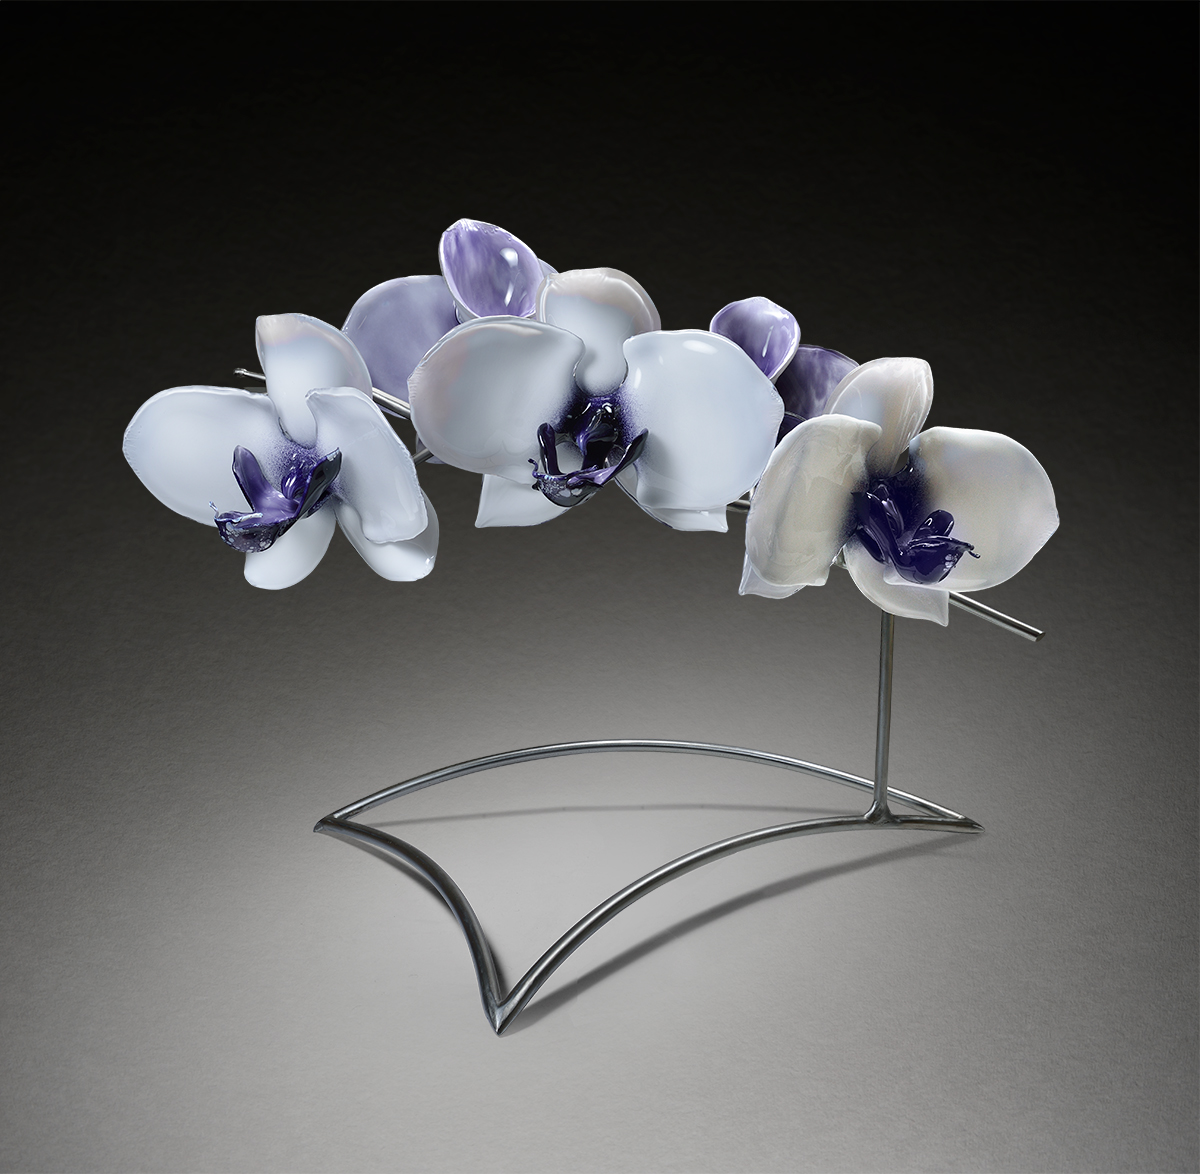 Orchids-with-stand-1-v2.jpg